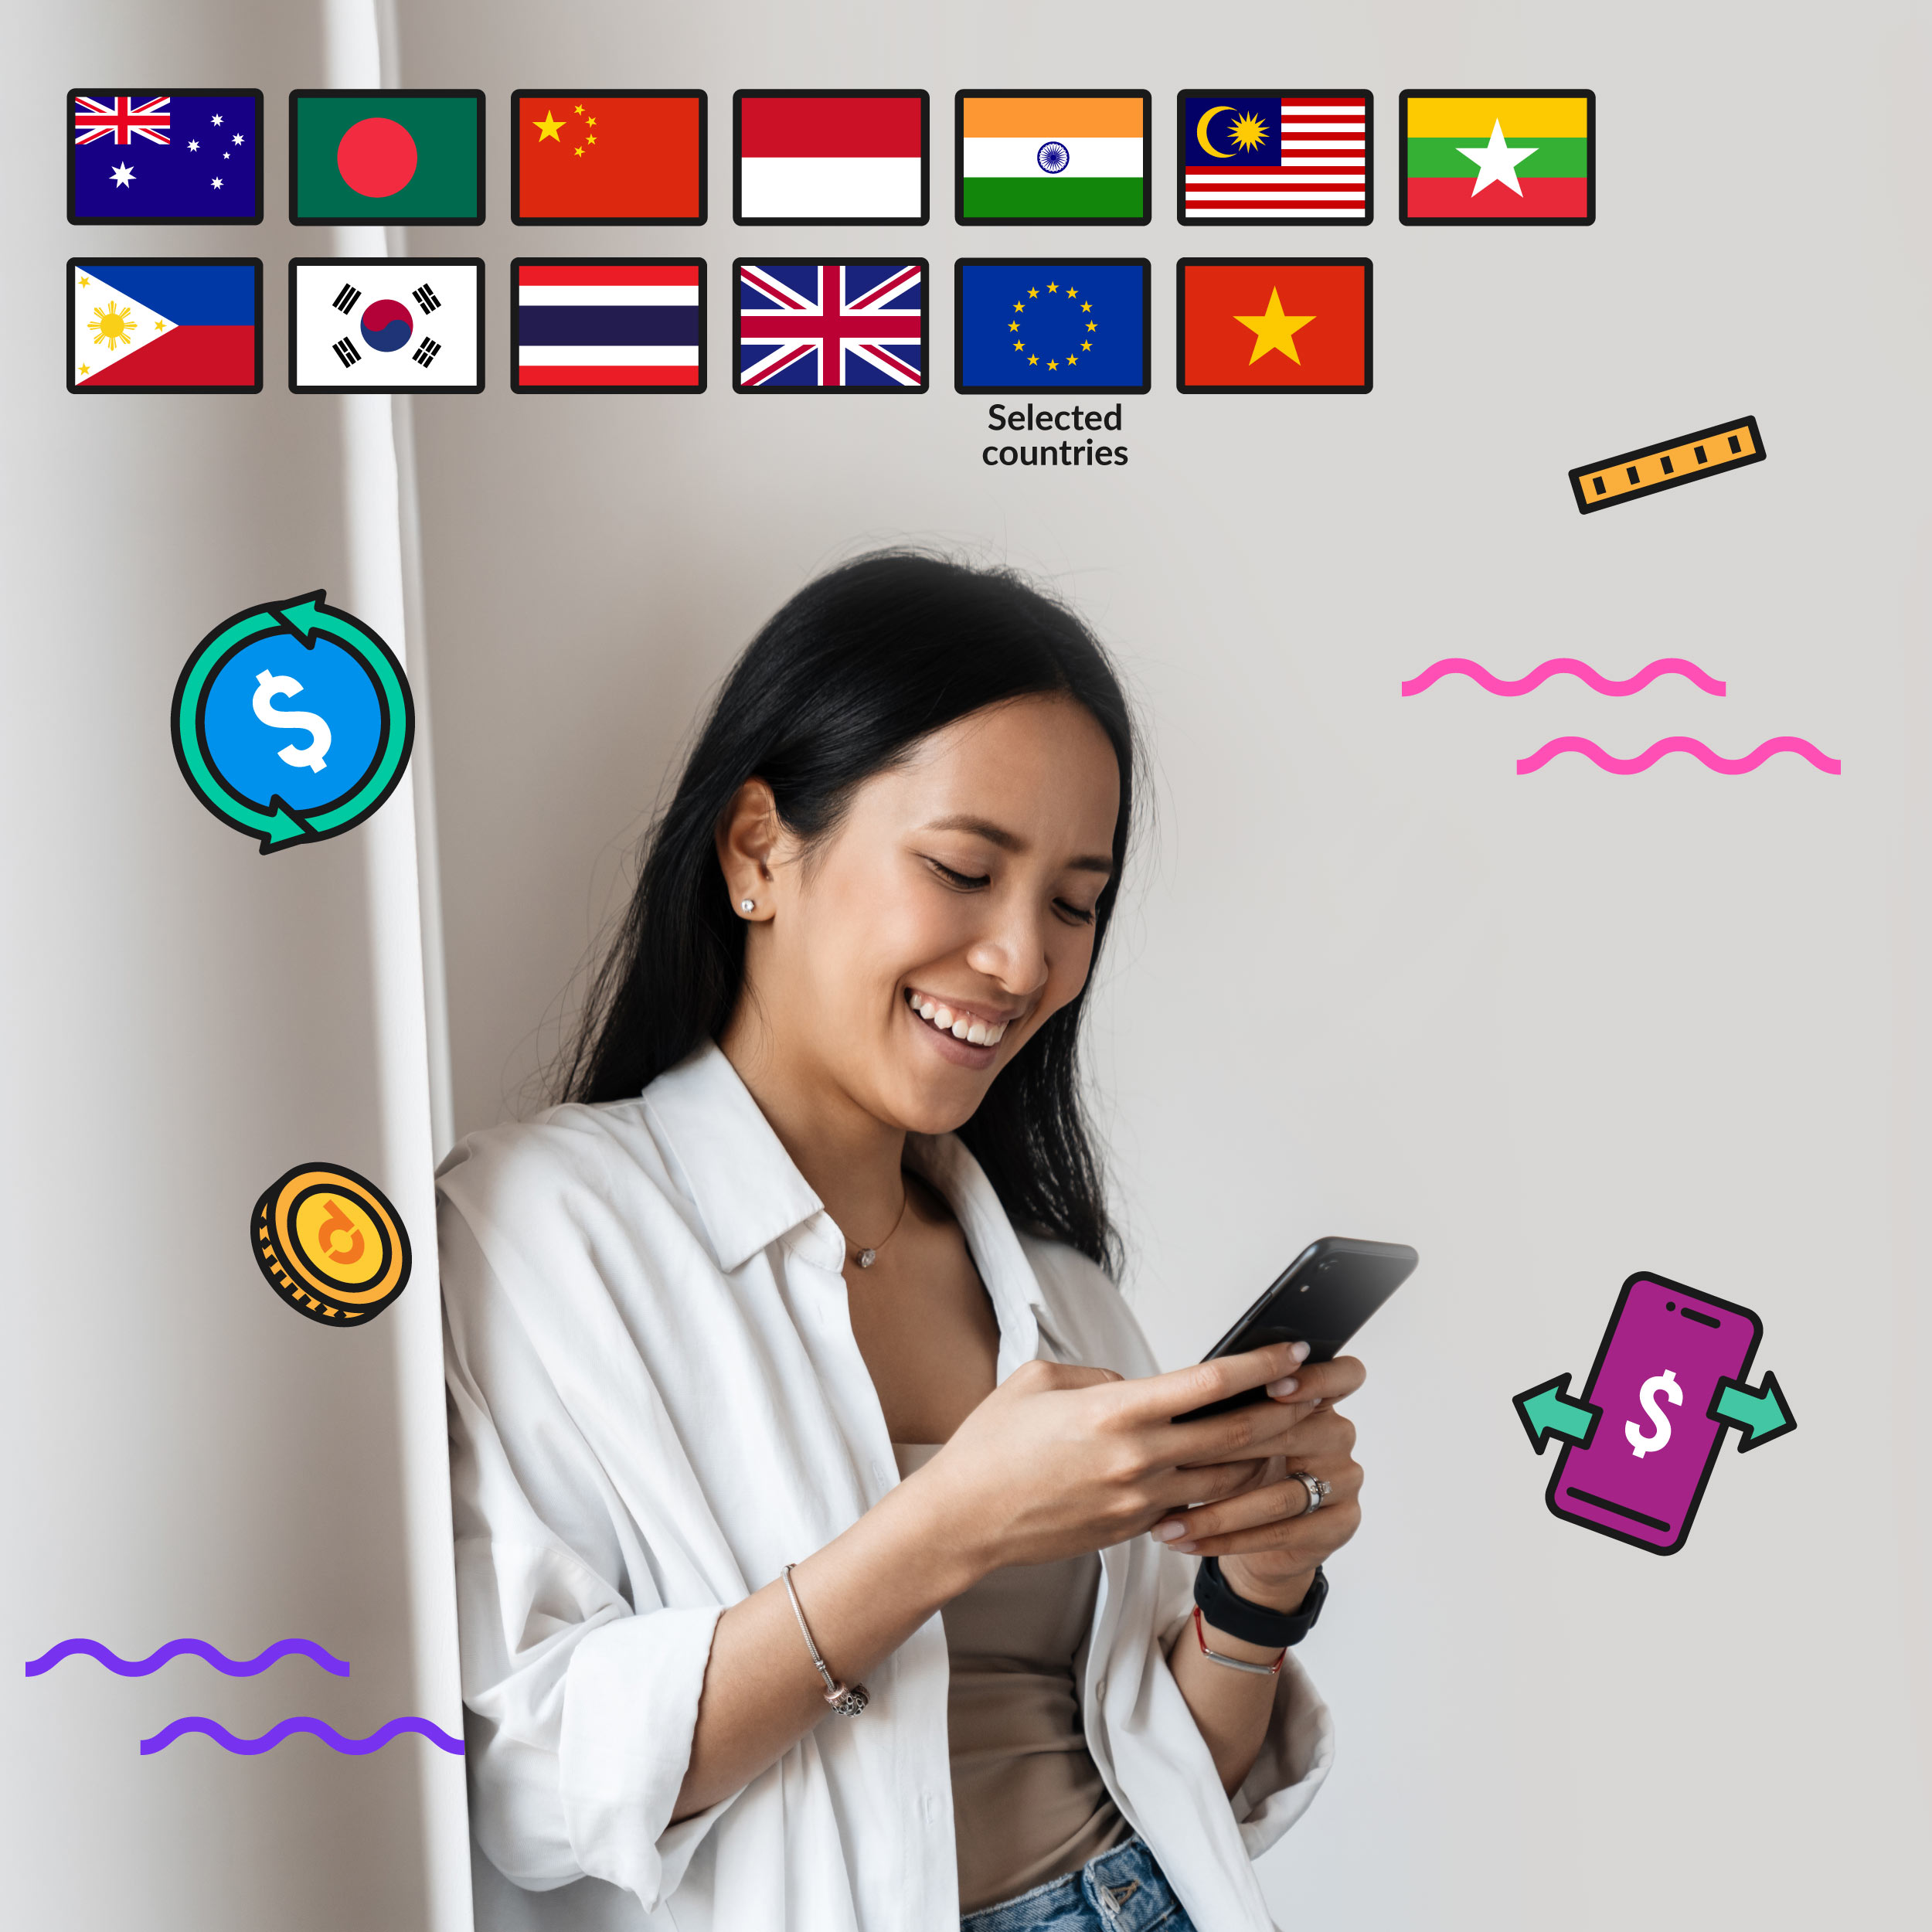 Make fast, easy, safe remittance with your phone